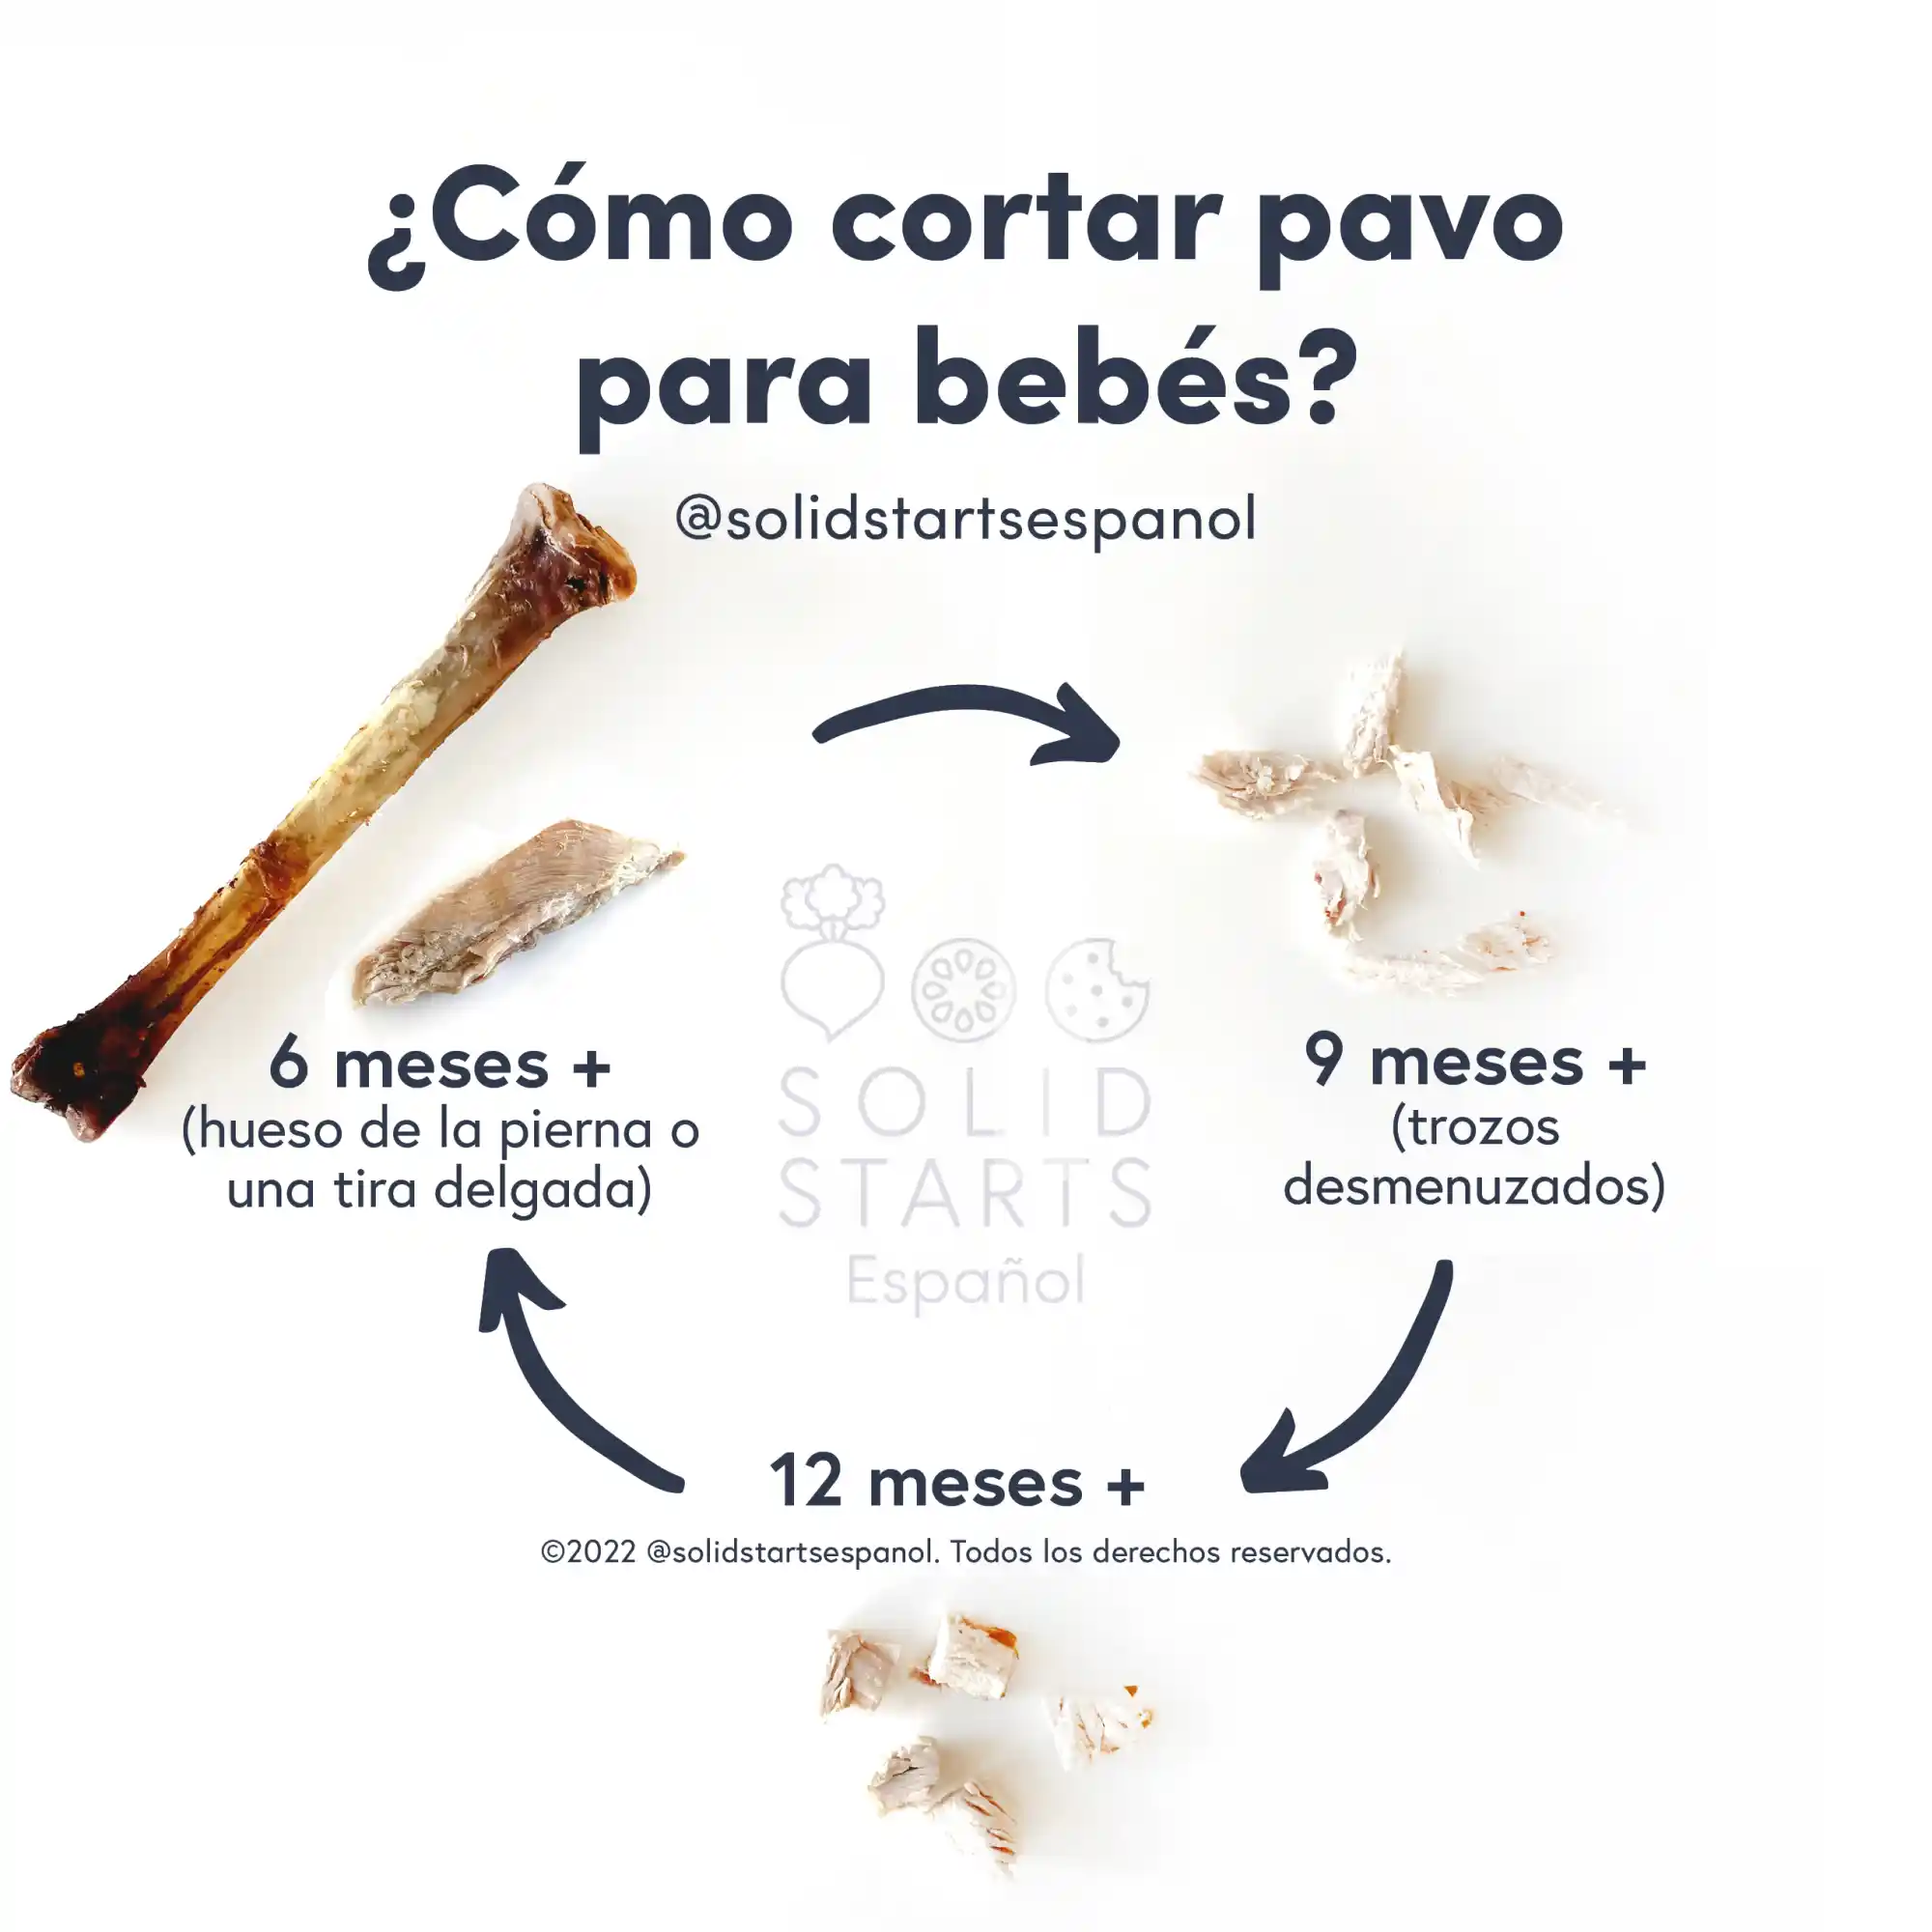 an infographic with the header "how to serve turkey for babies": a bone or thin strip for babies 6 months +, shreds of turkey meat for babies 9 months +, and bite-sized pieces for toddlers 12 months+